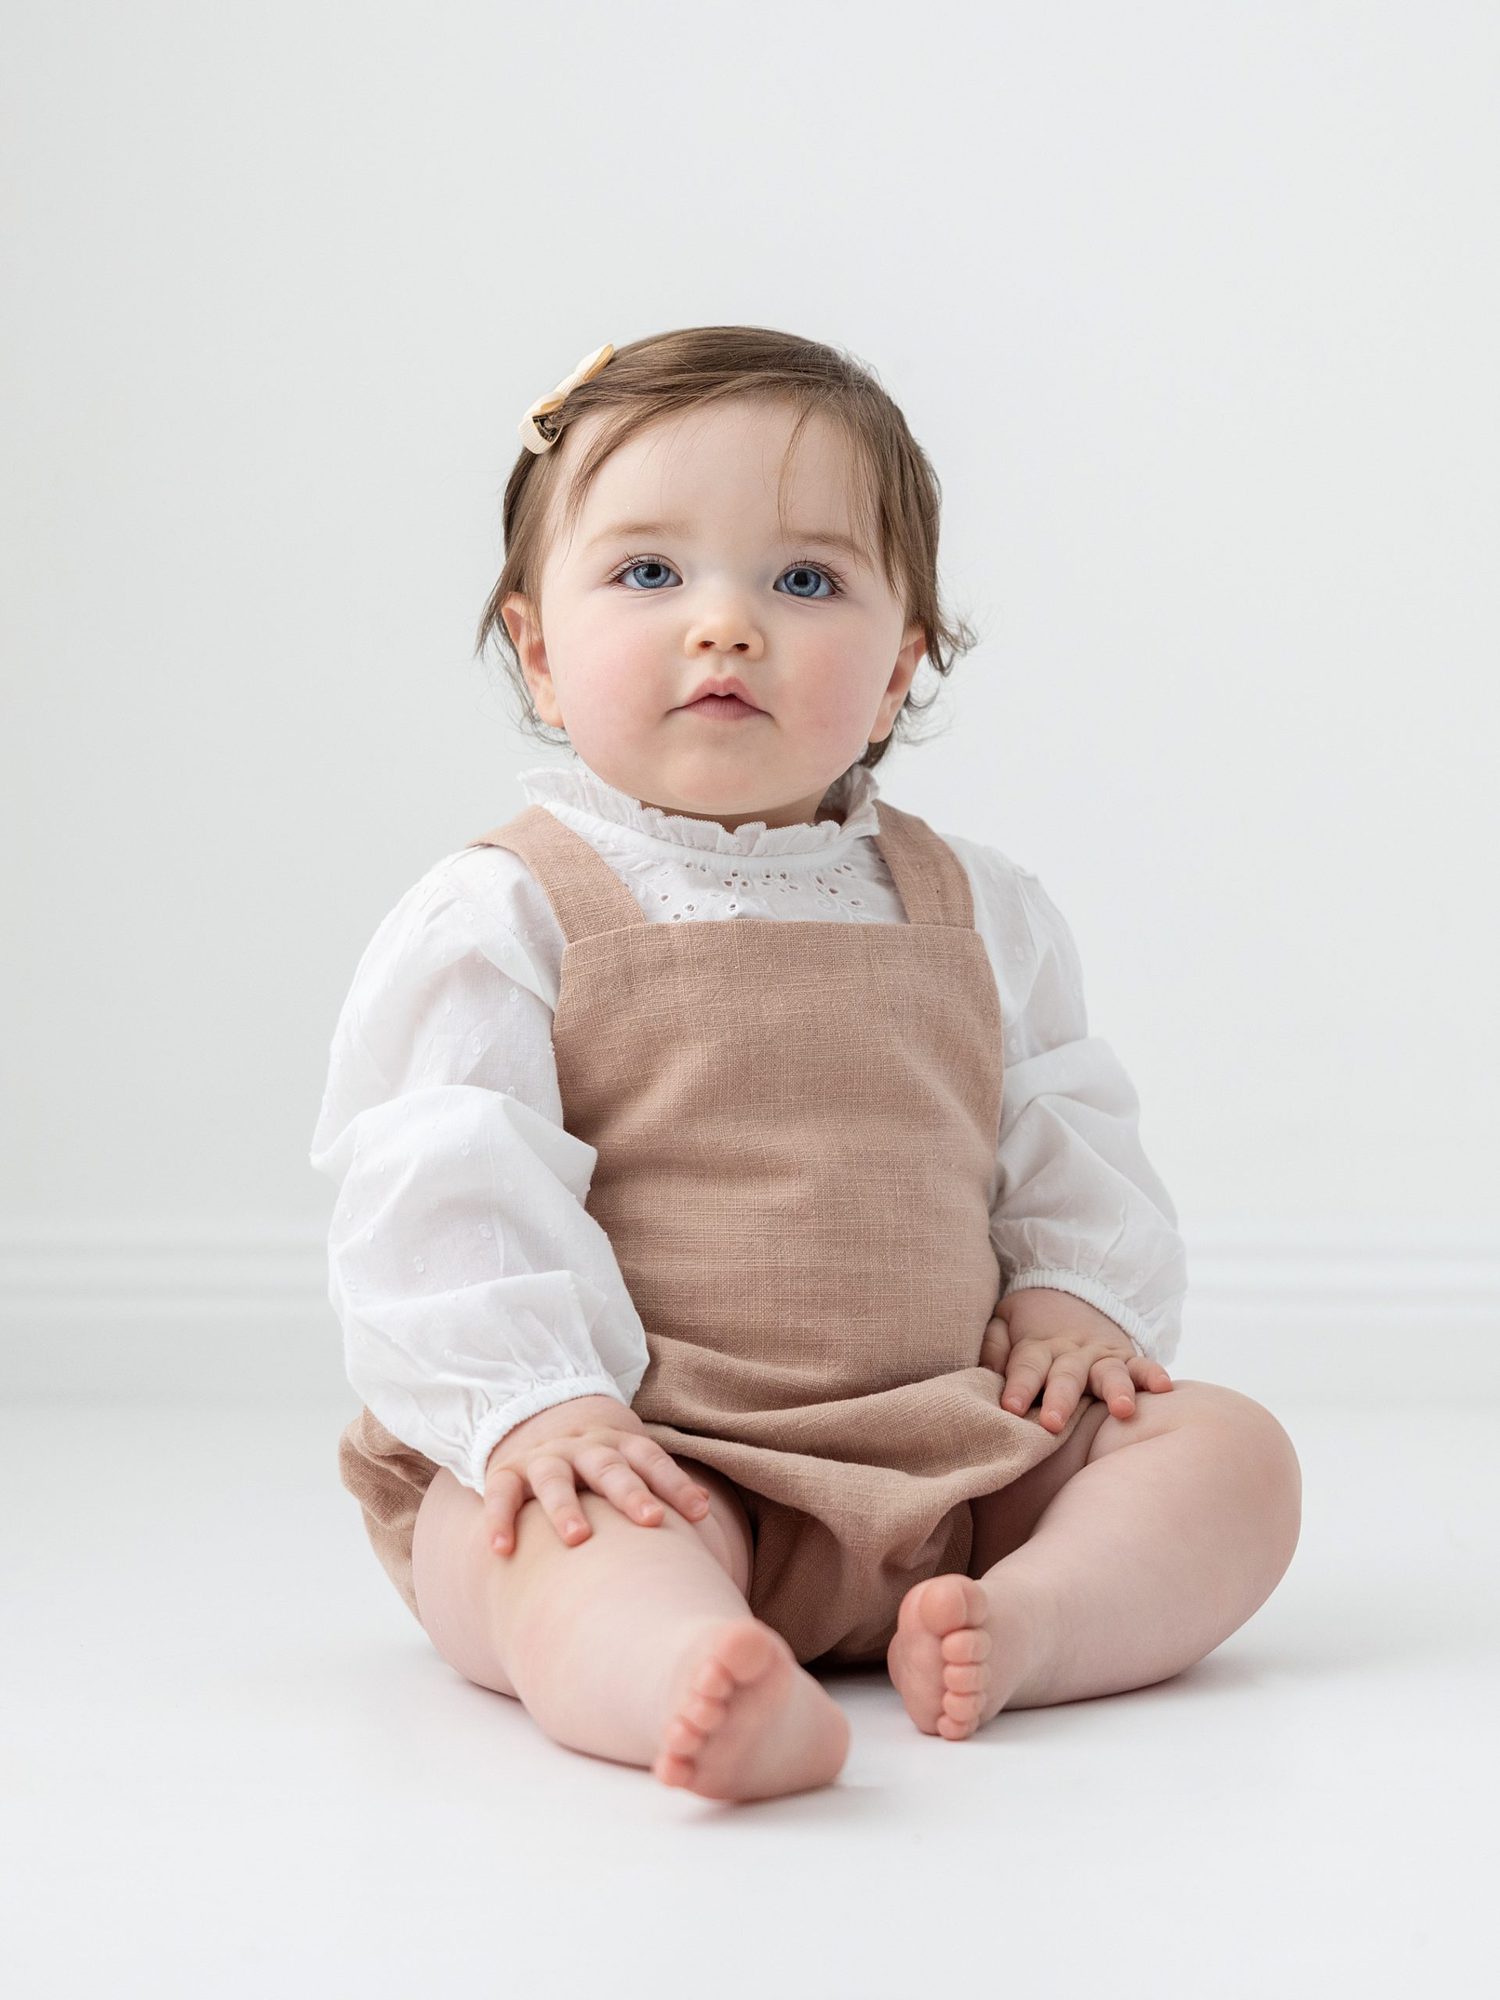 Beautiful Baby Girl sitting in a smart white blouse and beige linen romper